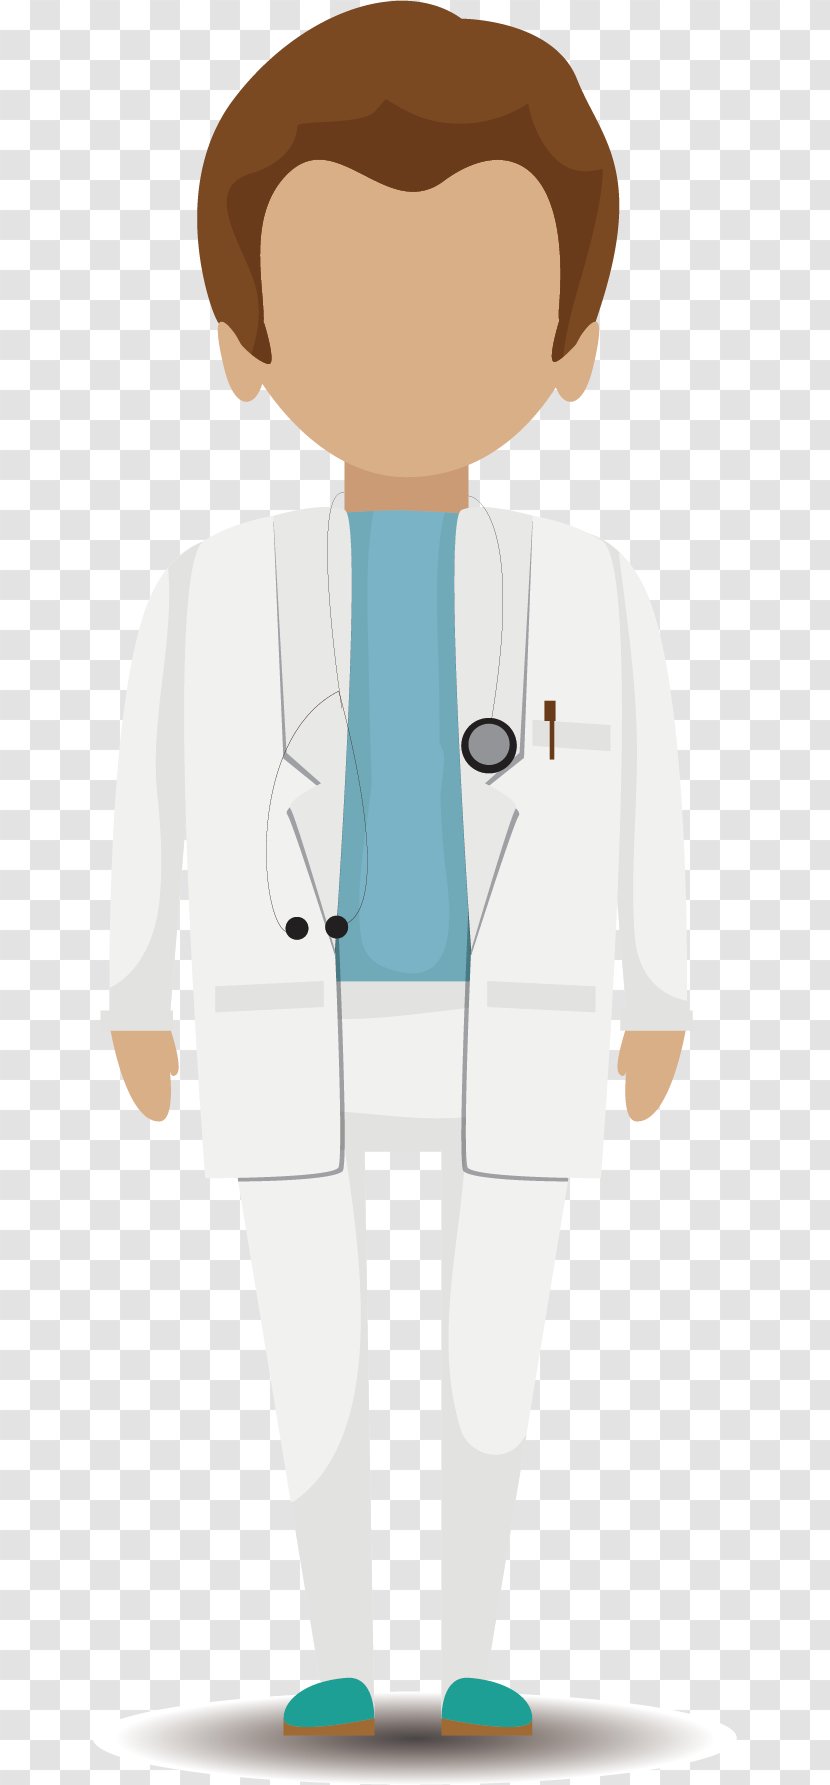 Physician Illustration - Watercolor - Doctor Head Transparent PNG